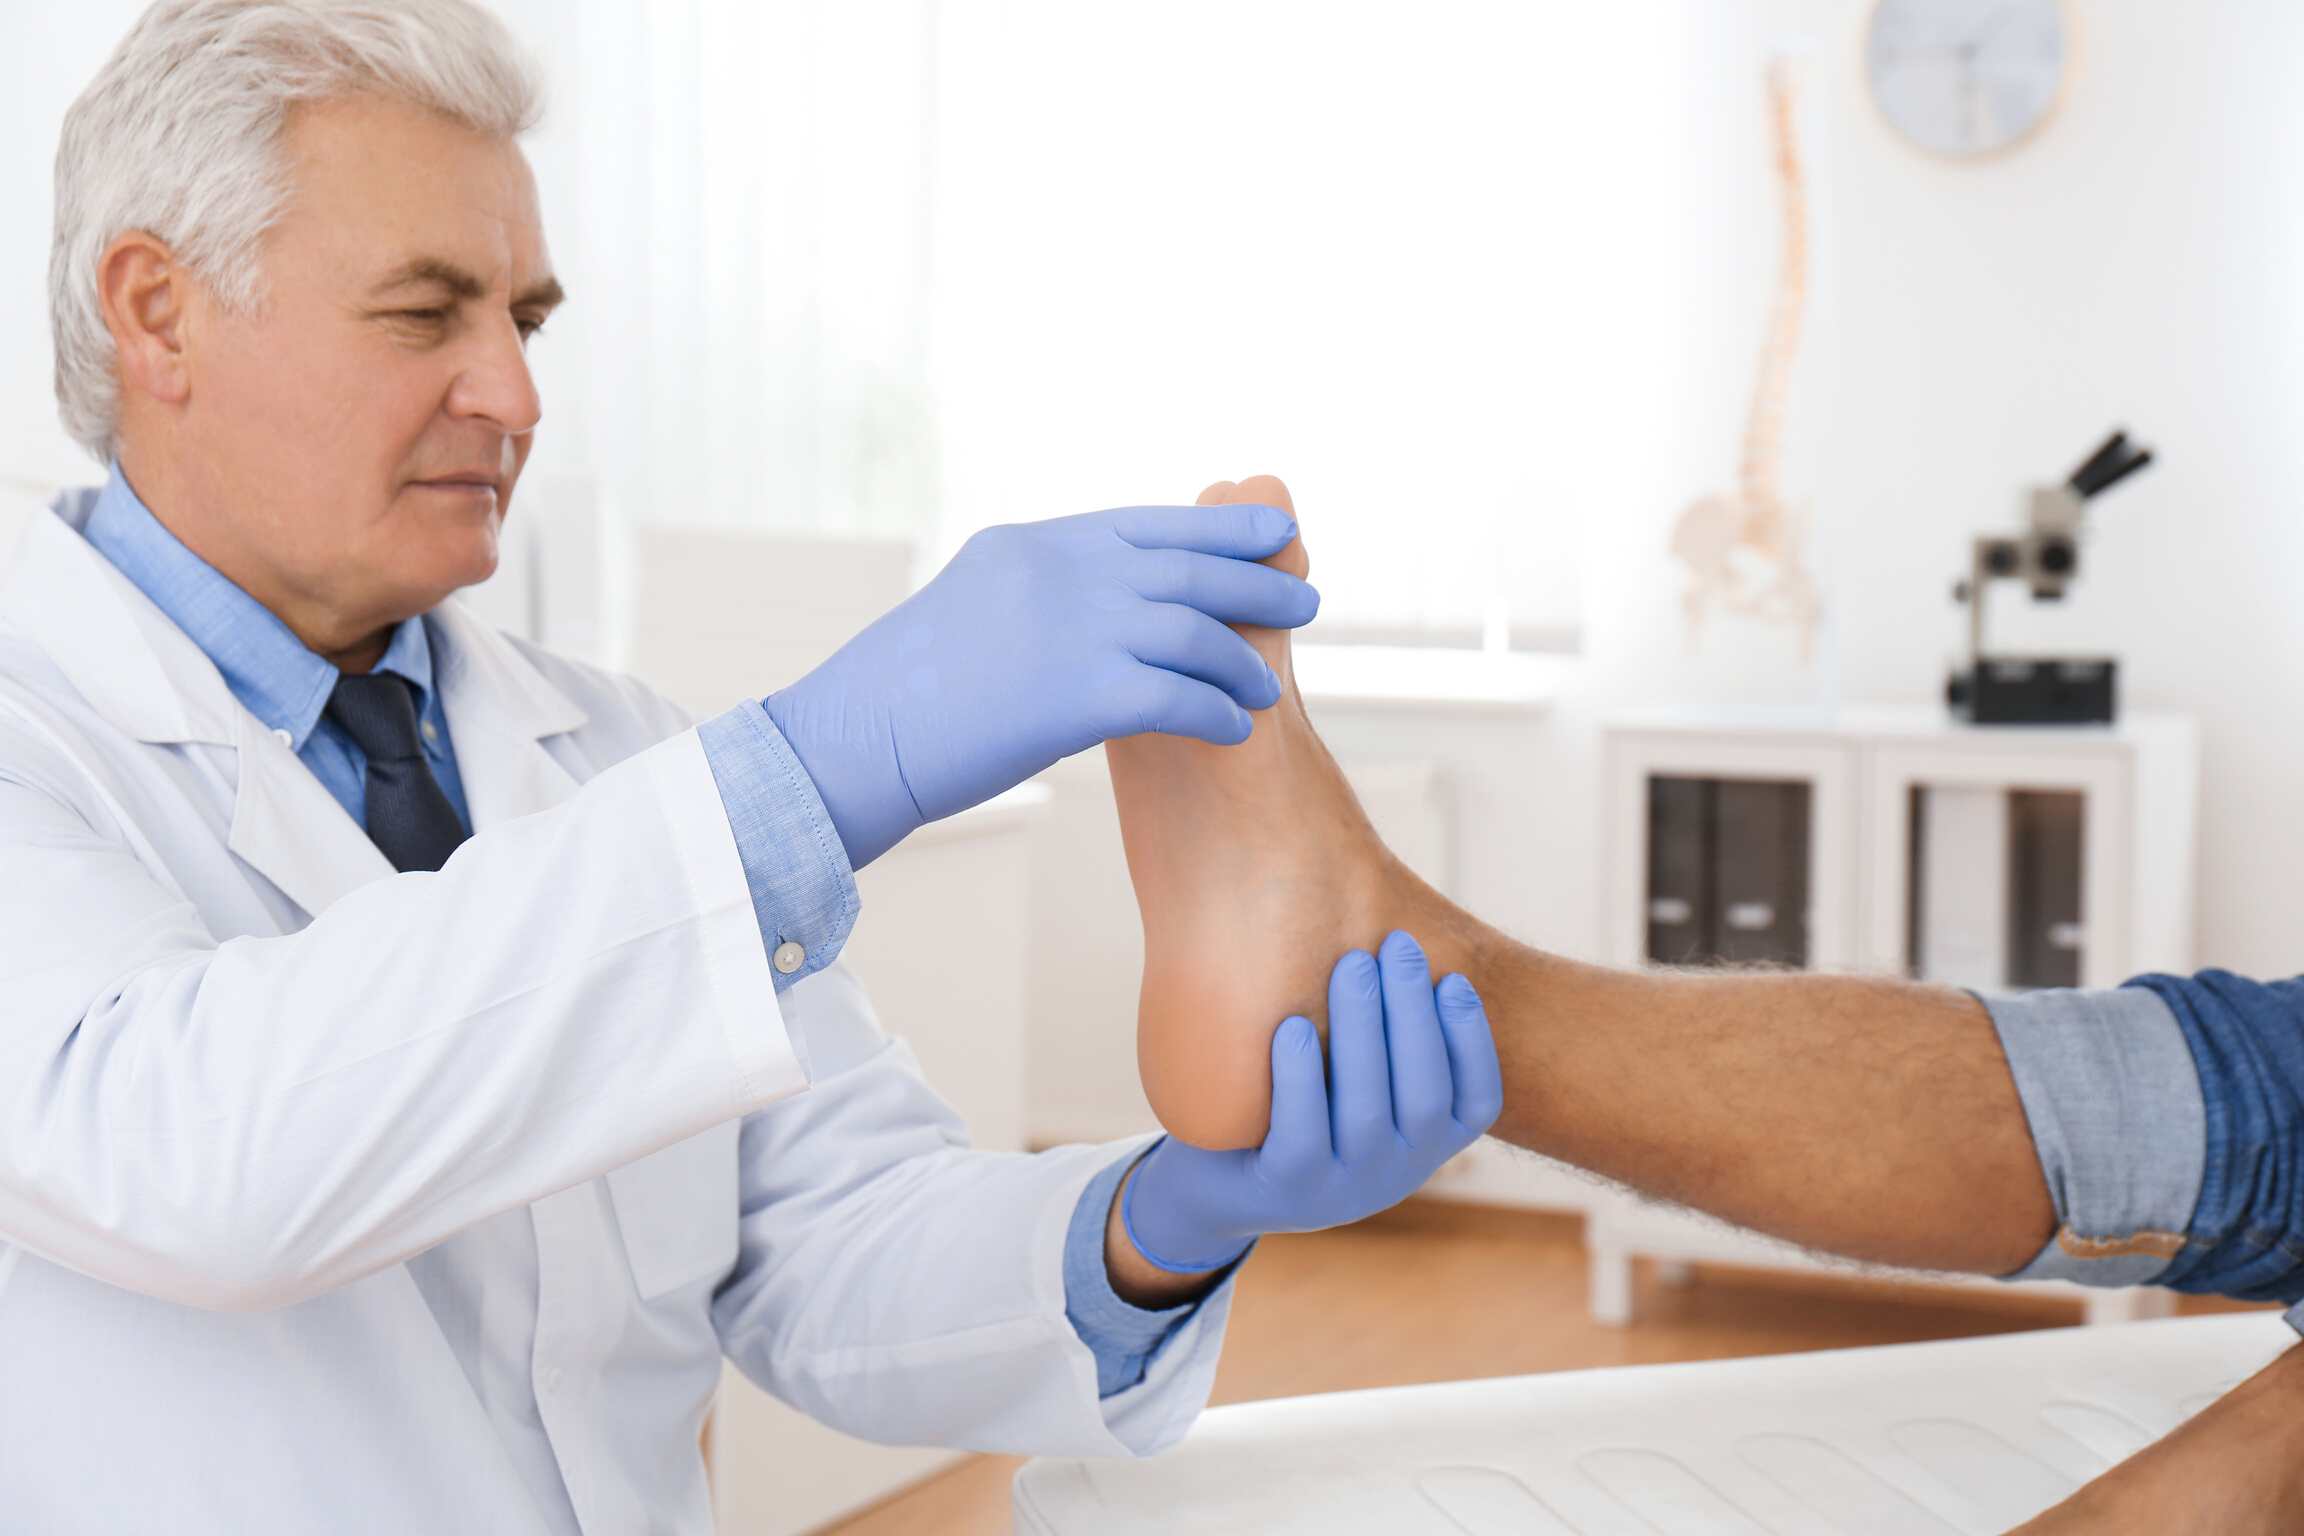 Male Orthopedist Checking Patient's Foot in Clinic